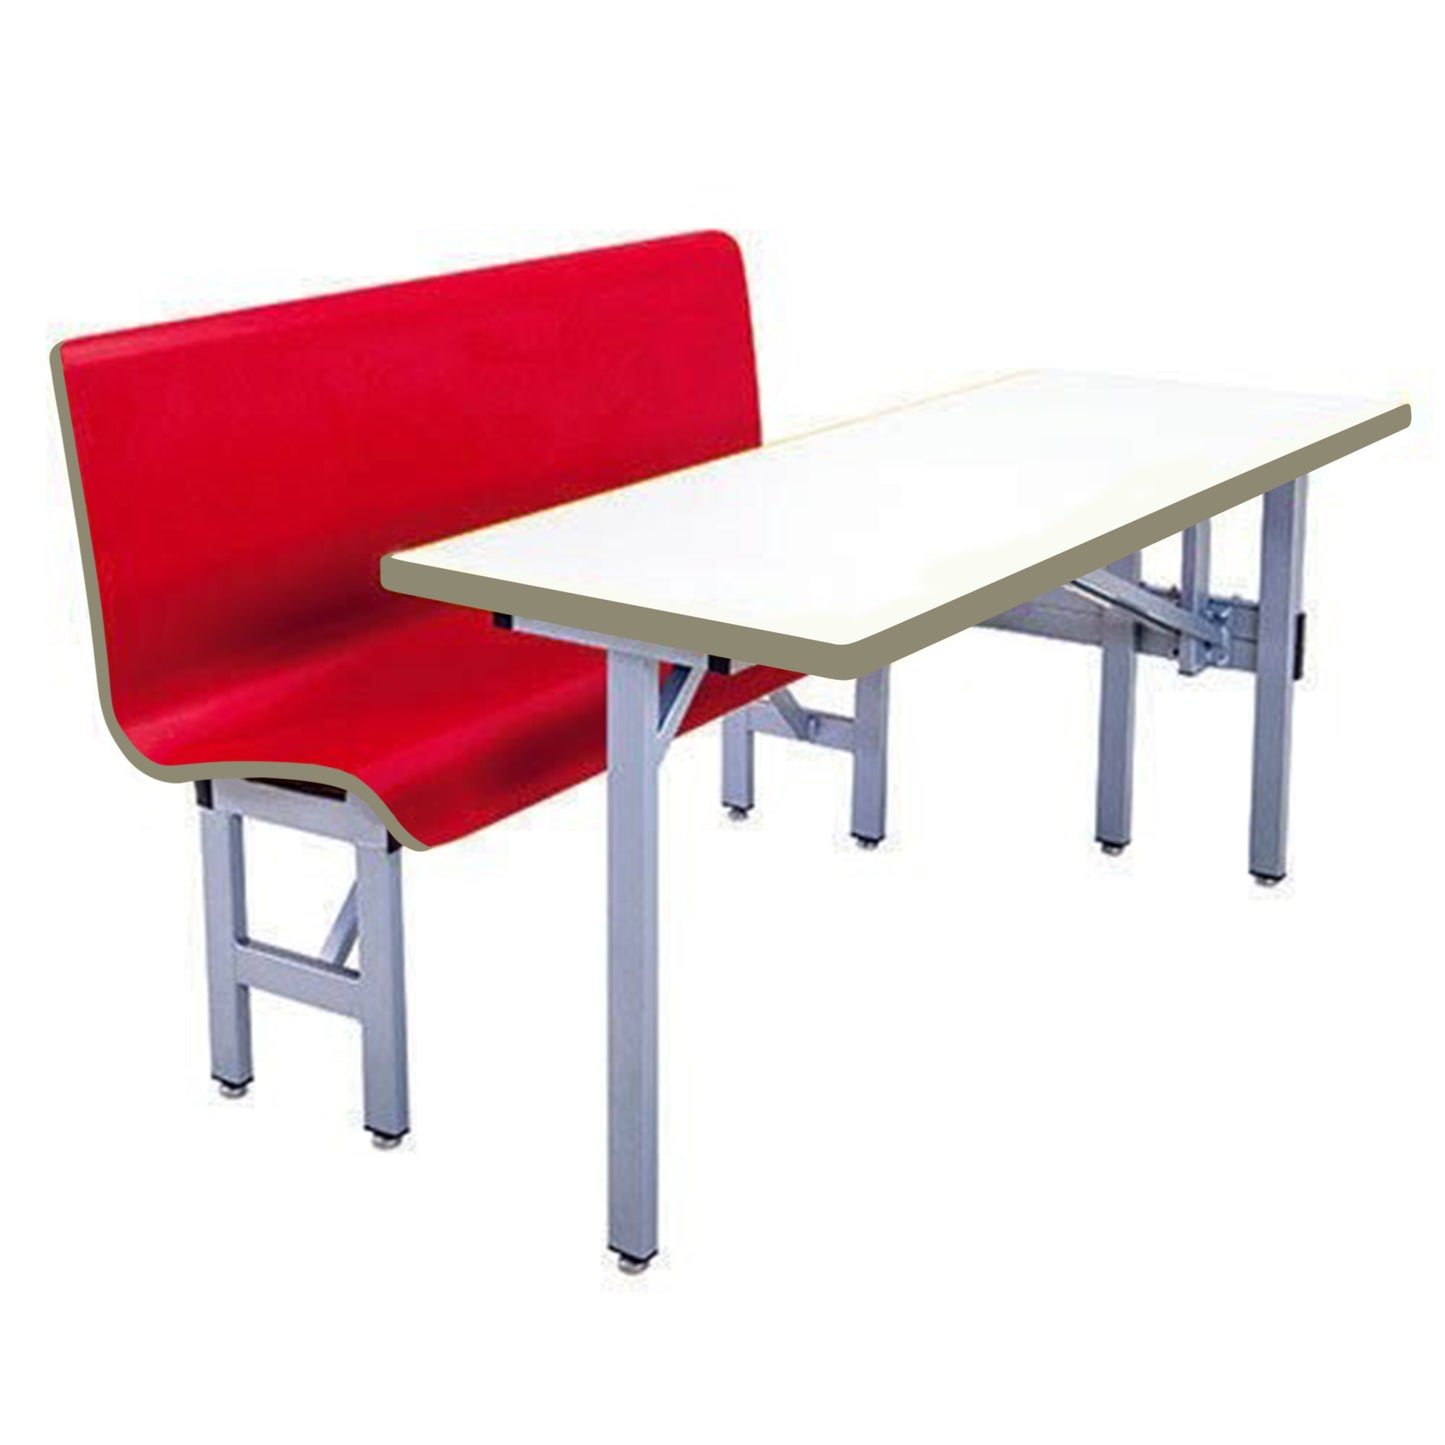 AmTab Booth Seating with Table - Half Package - 48"W x 60"L x 38"H  (AMT-MWHBSP245)